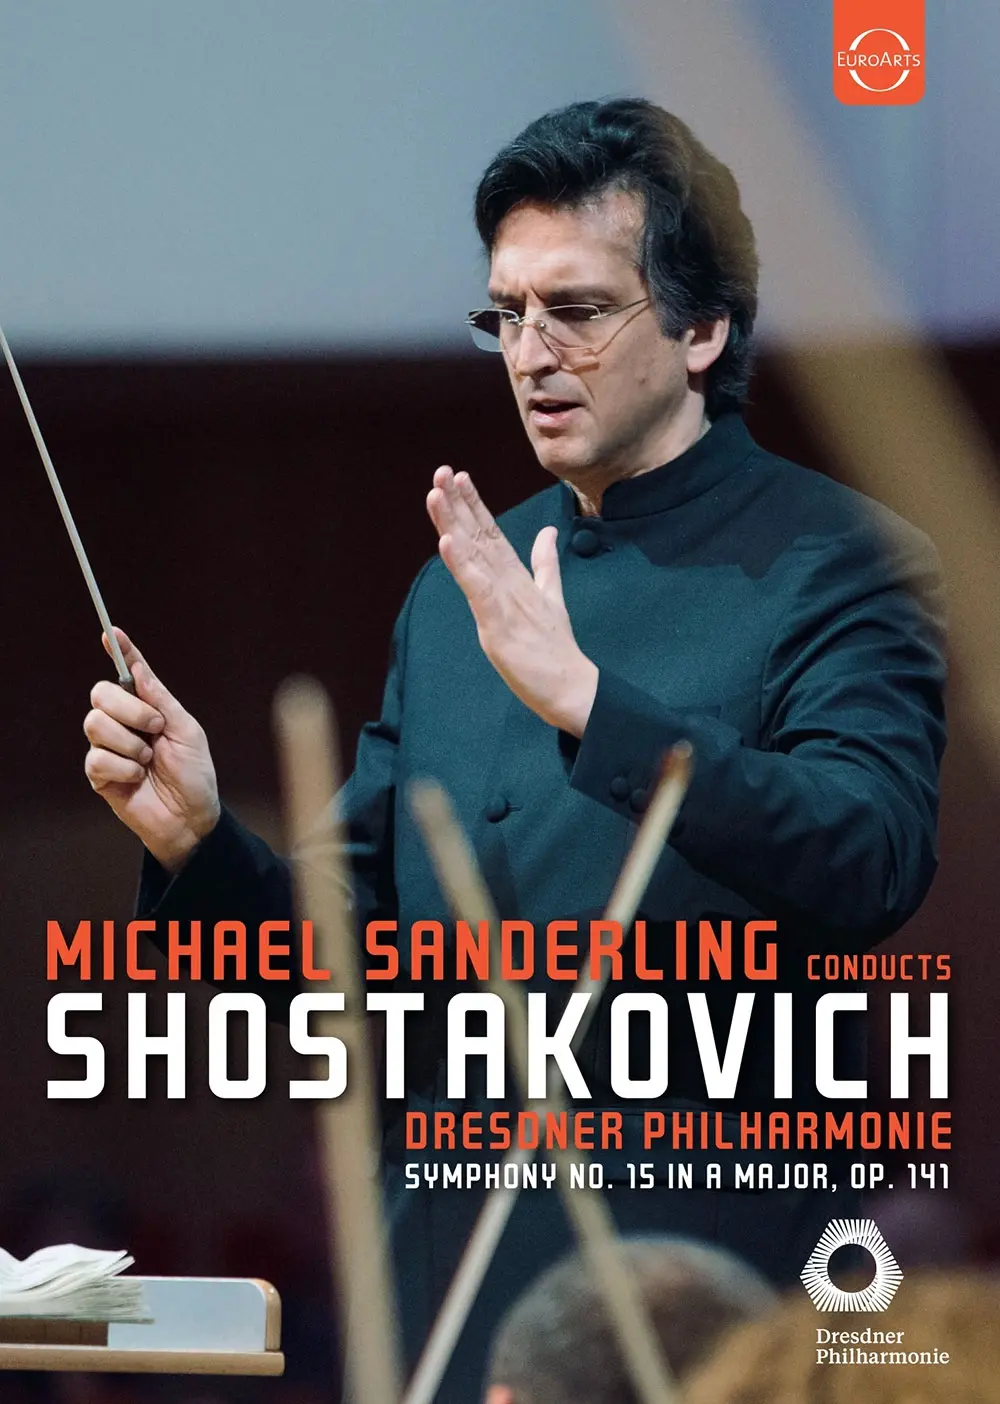 CD Cover | MICHAEL SANDERLING CONDUCTS SHOSTAKOVITCH